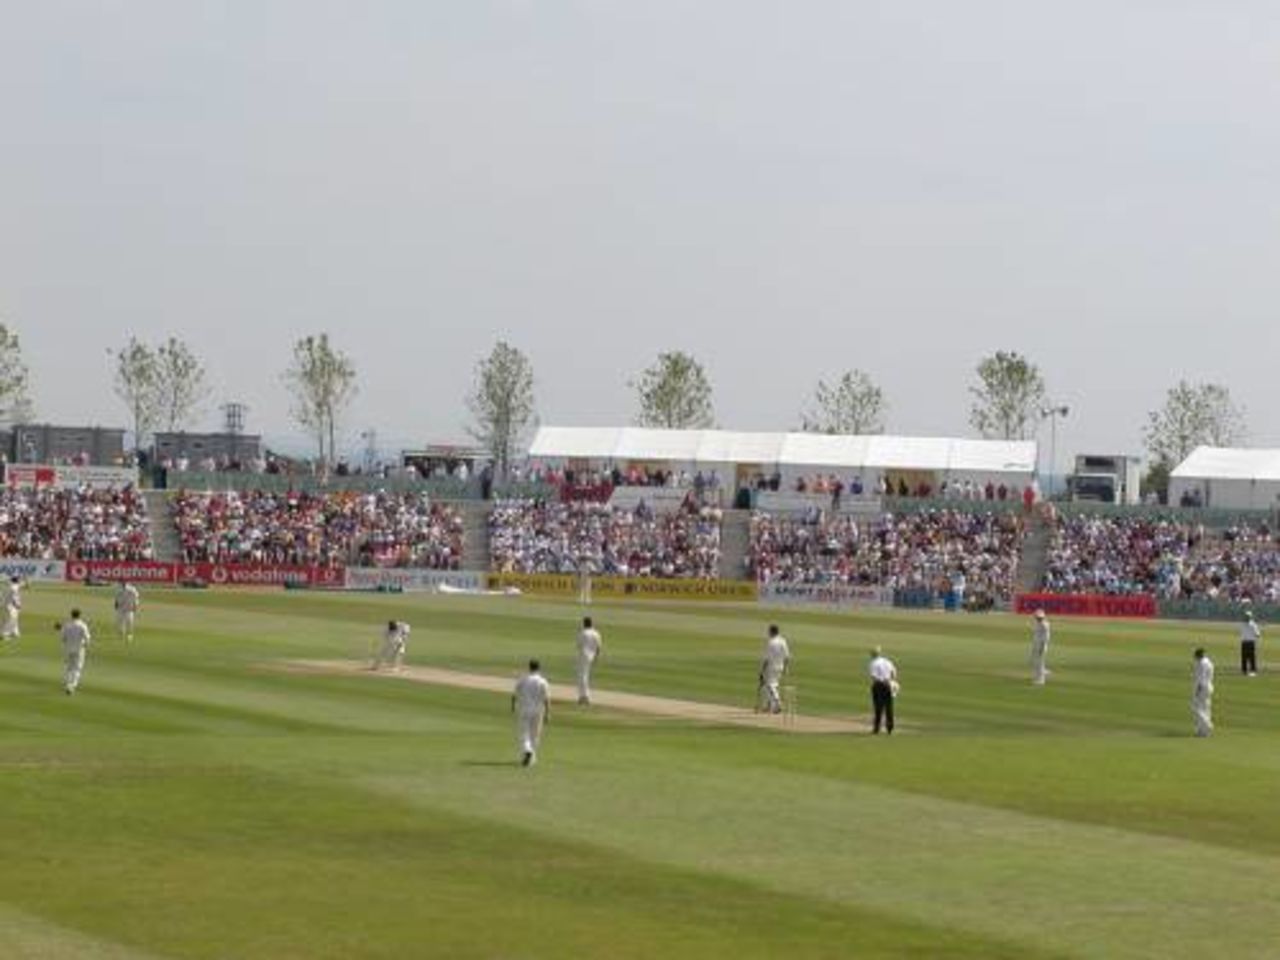 Scene of play in the historic match between Hampshire and Australia.